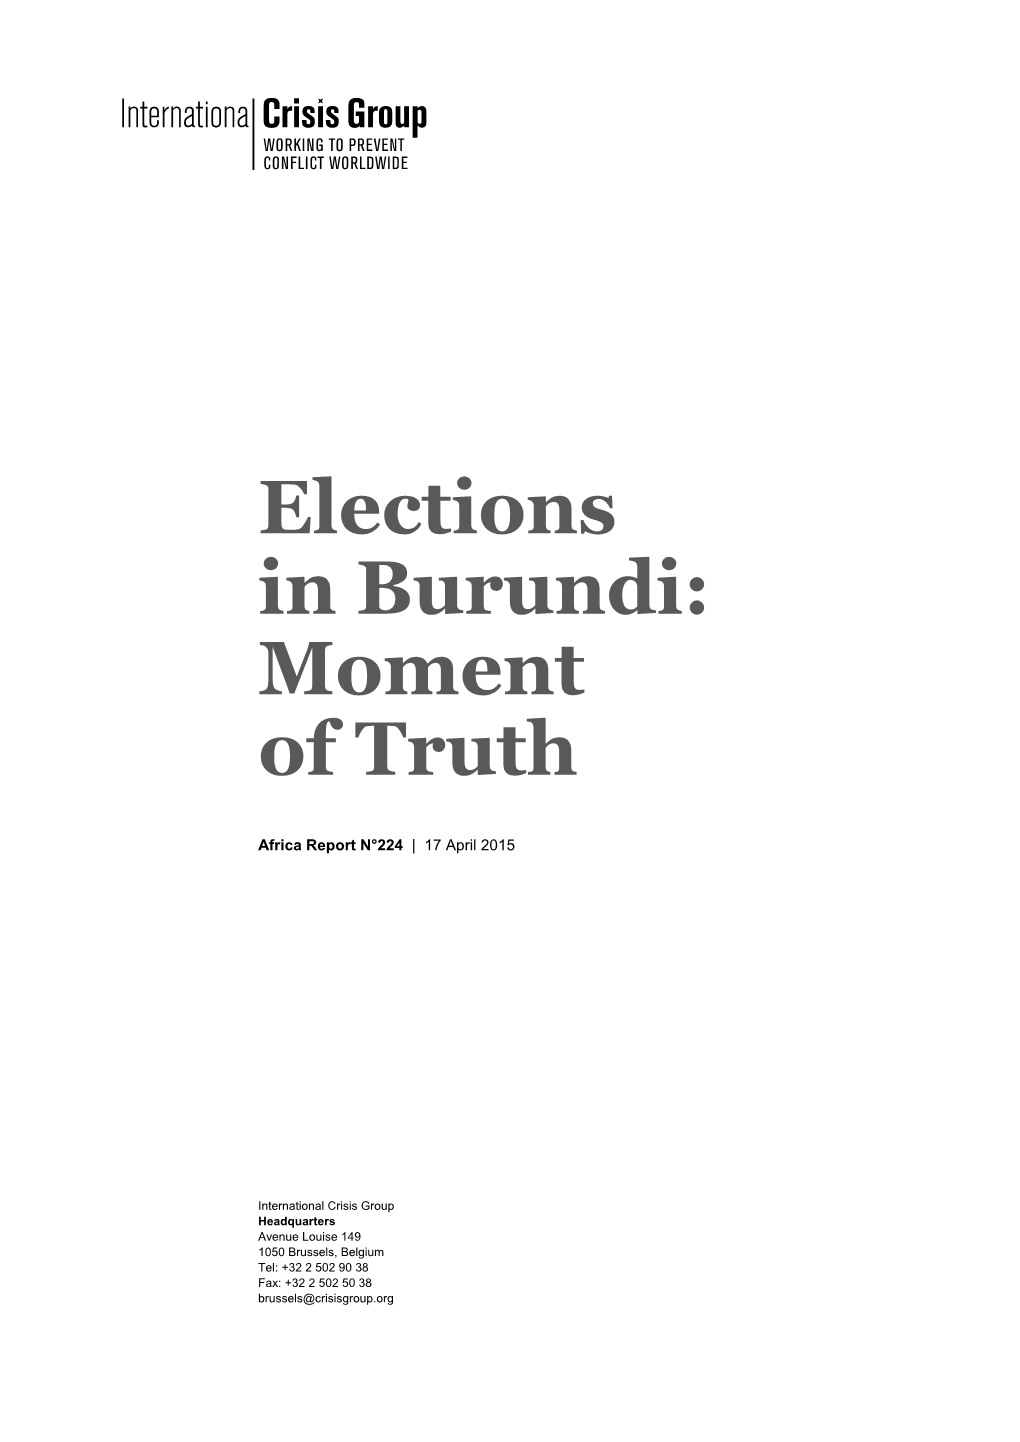 Elections in Burundi: Moment of Truth